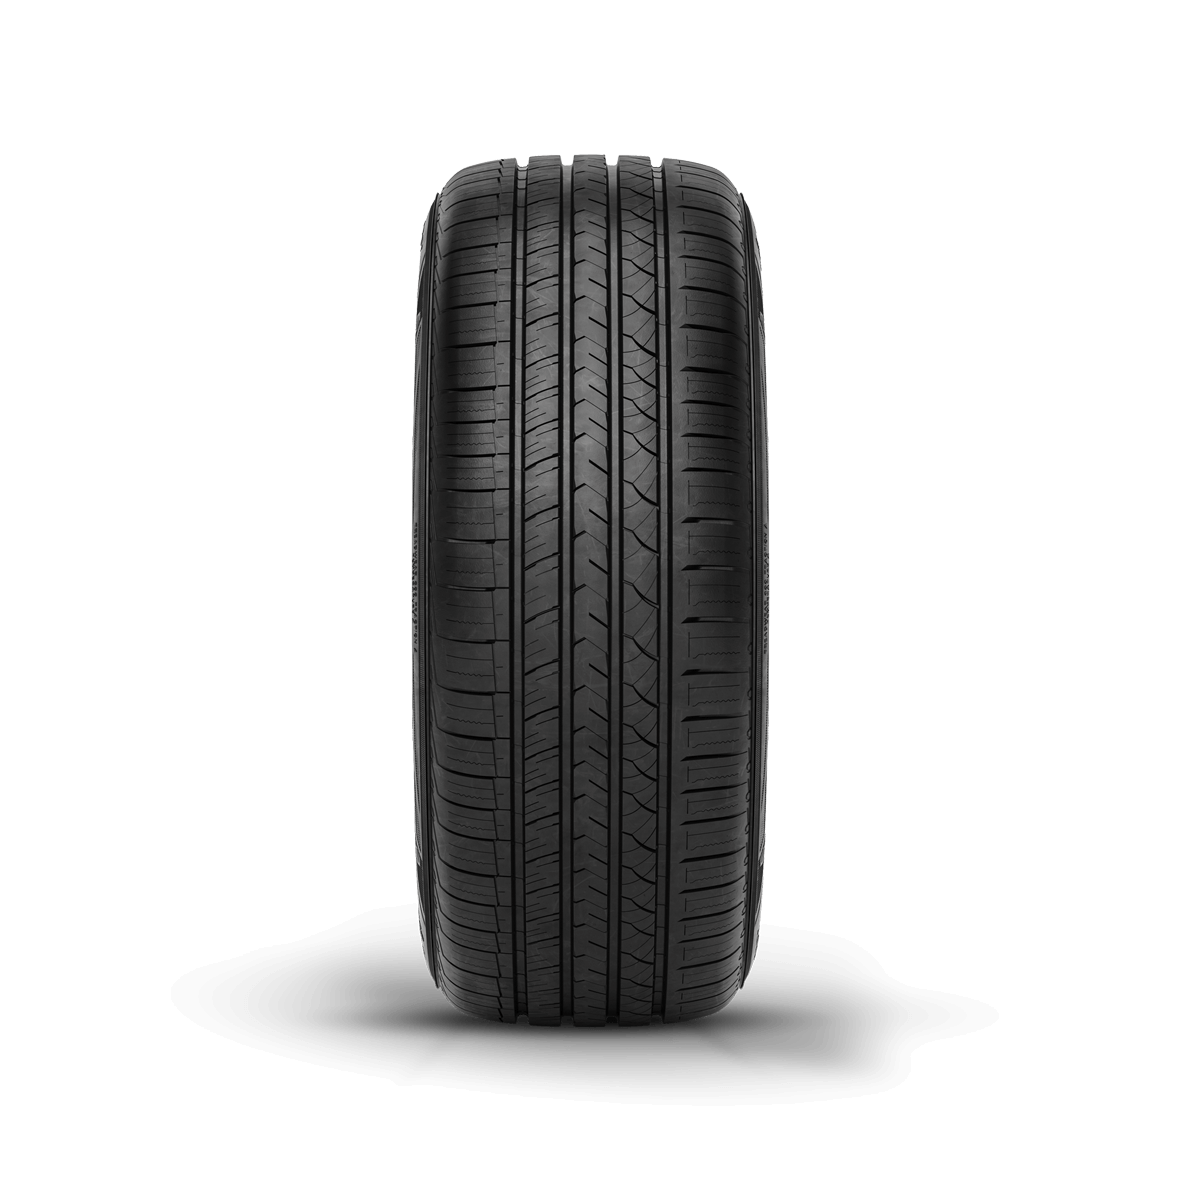 The tread of the all-new Raptis R-T6X.